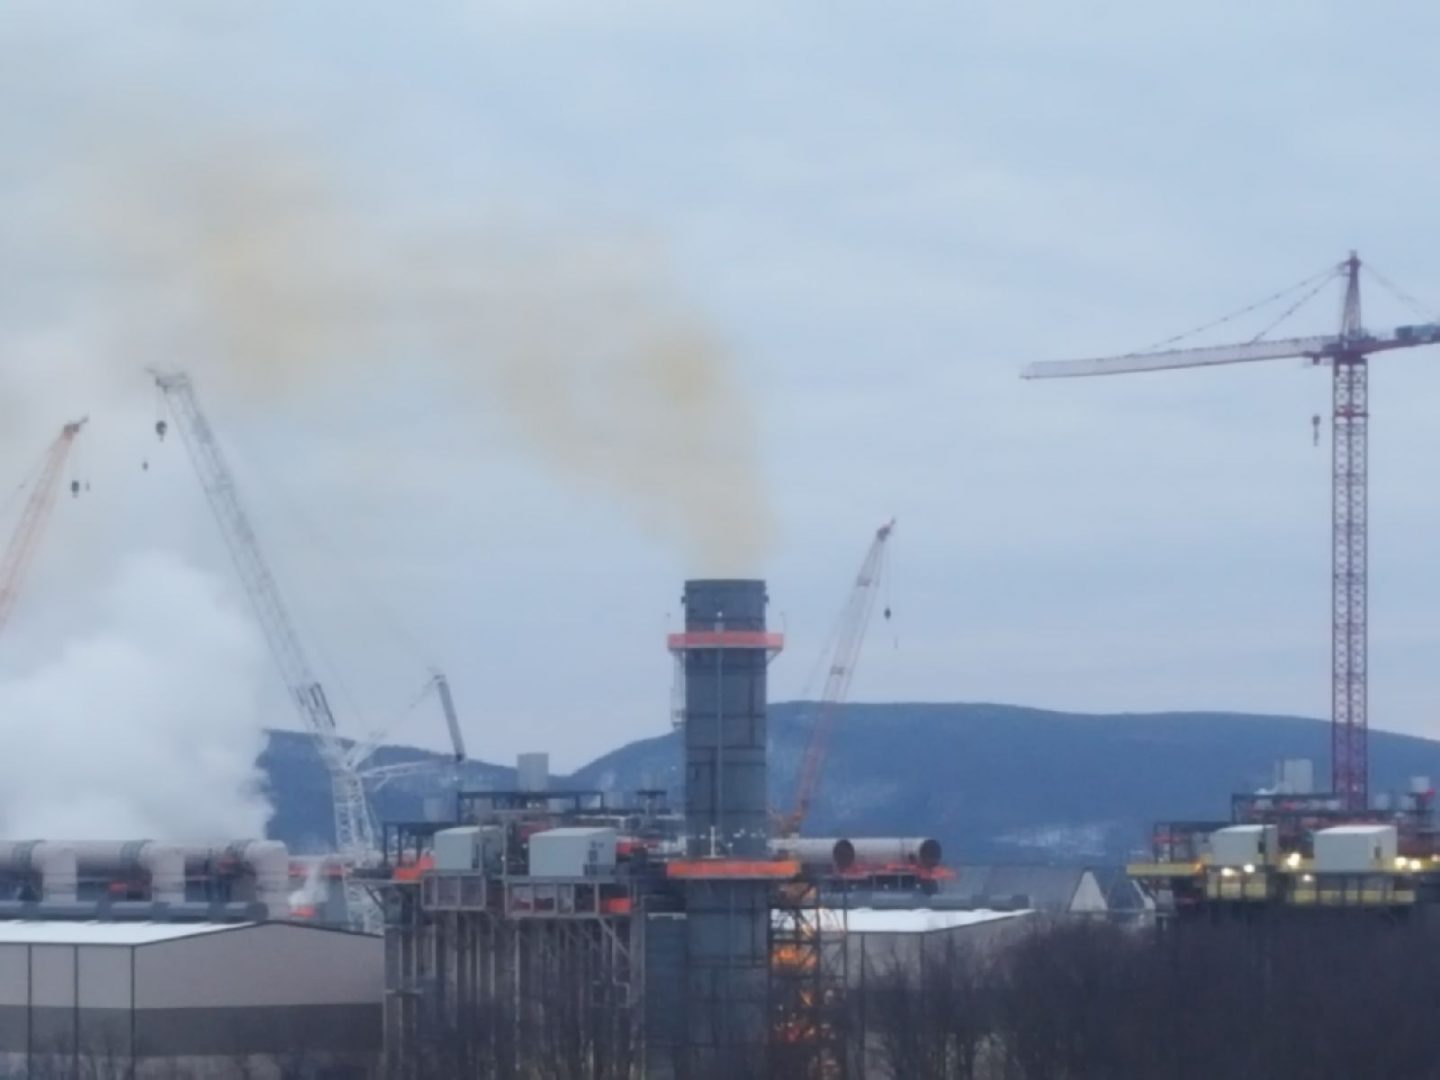 Pennsylvania environmental regulators are investigating health complaints after the Invenergy natural gas power plant in Jessup Pa. began spewing plumes of smoke this week. The company says the emissions are temporary and part of a planned commissioning process.